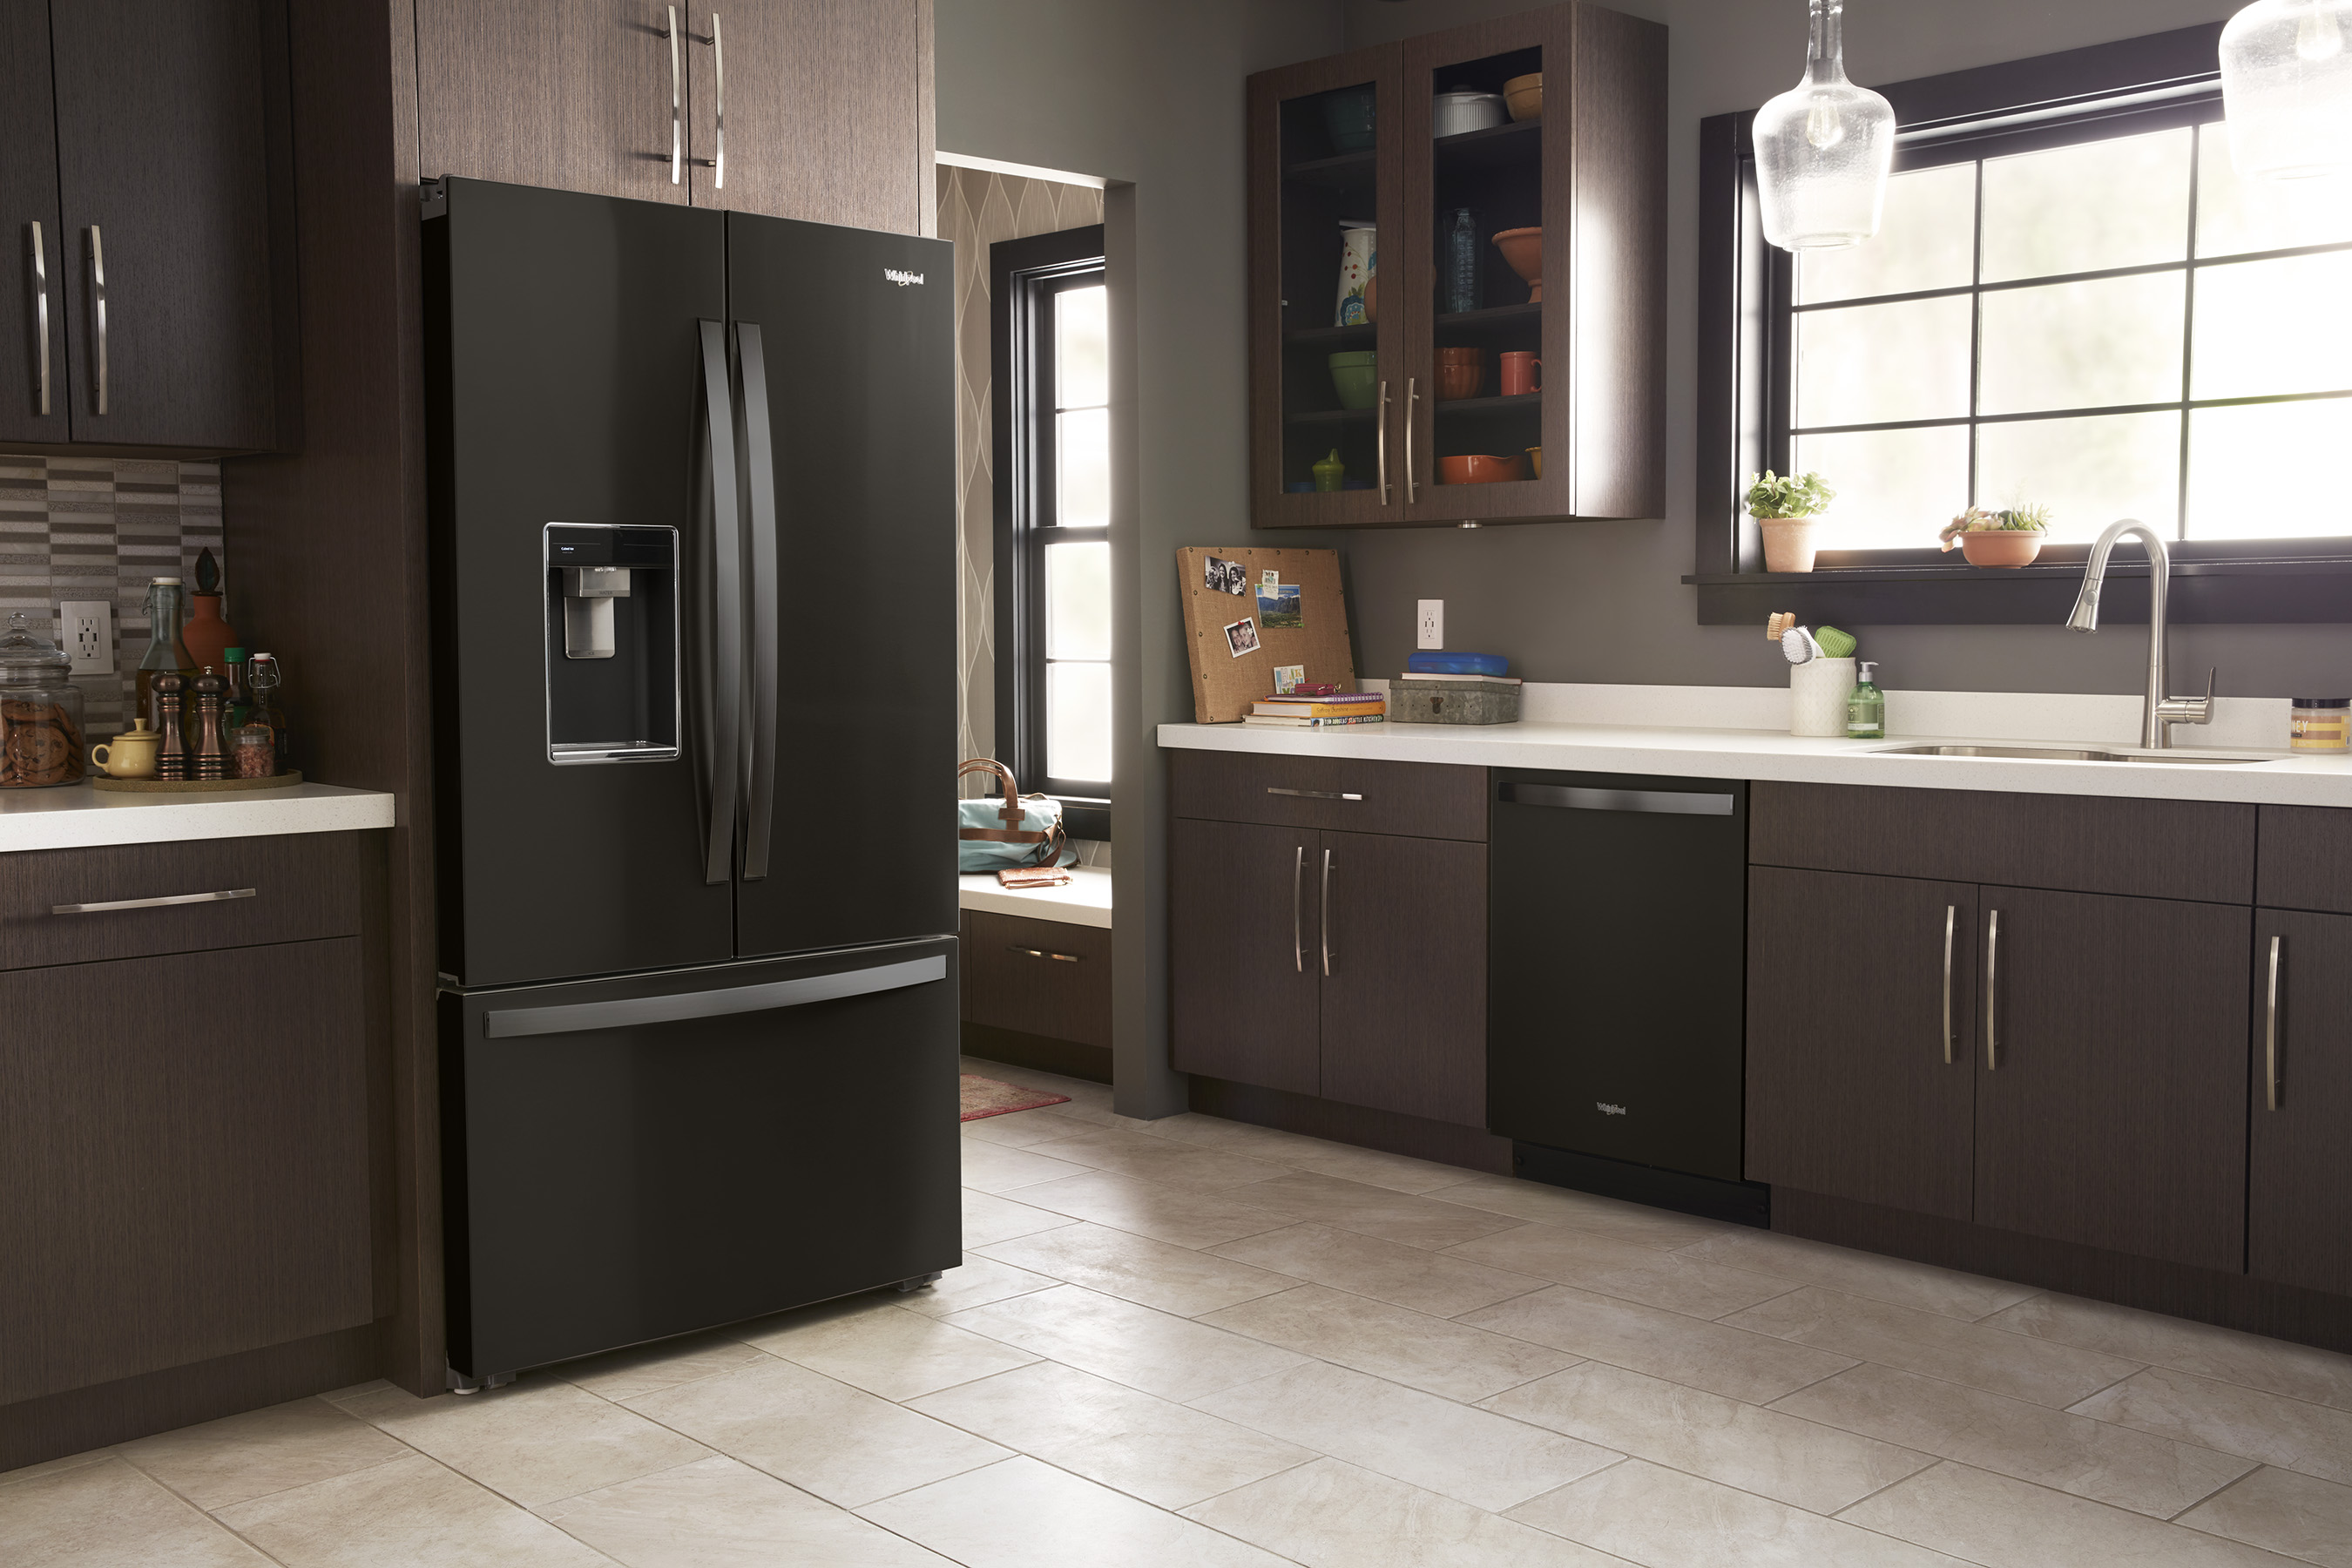 With the Whirlpool® Smart ENERGY STAR® Certified Dishwasher with Third Level Rack, families can load more dishes and get extra room for hard-to-fit items with the additional rack.